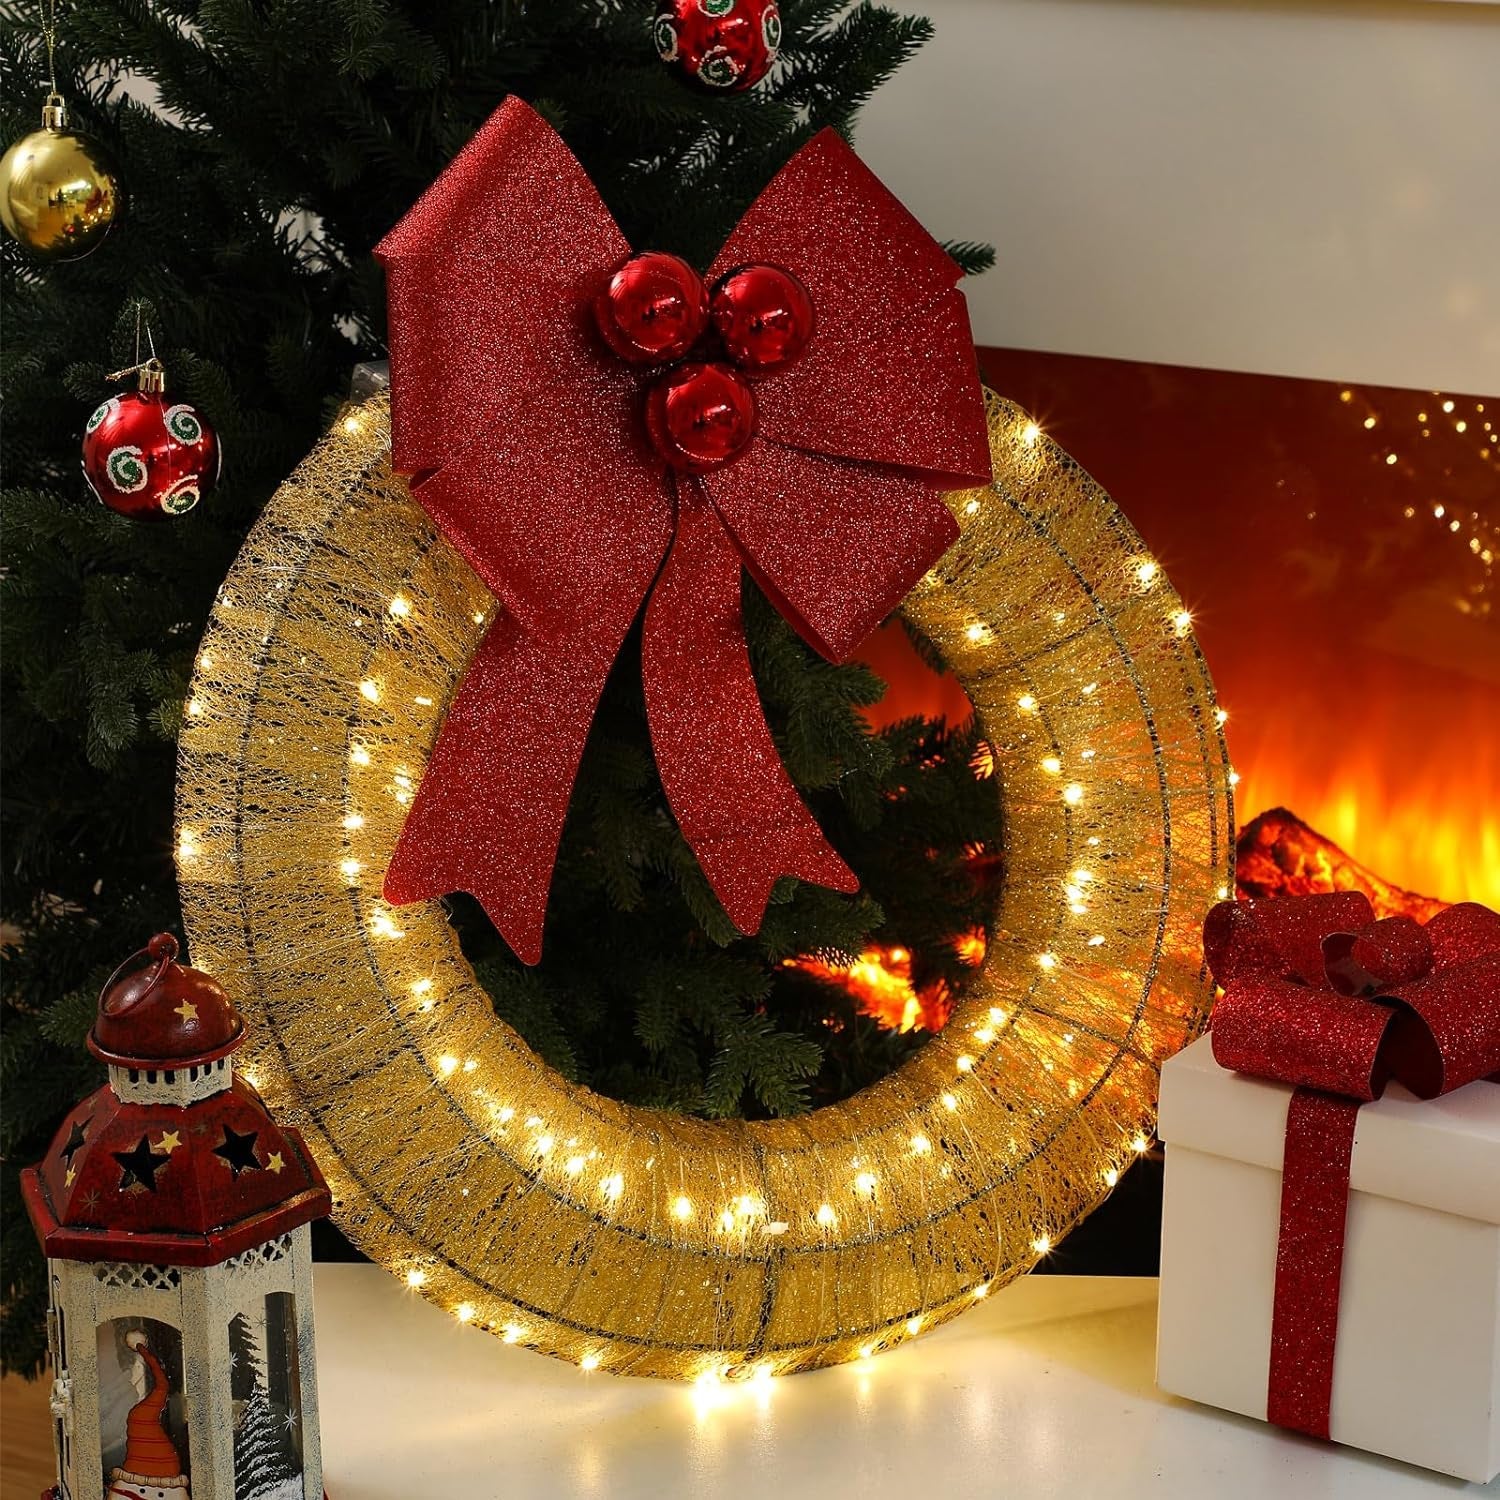 Lighted Christmas Wreath 19 Inch Champagne Christmas Holiday Decorative LED Tinsel Wreath Battery Operated Glittering Xmas Outdoor Window Wreaths for Christmas Indoor Home Door Decoration